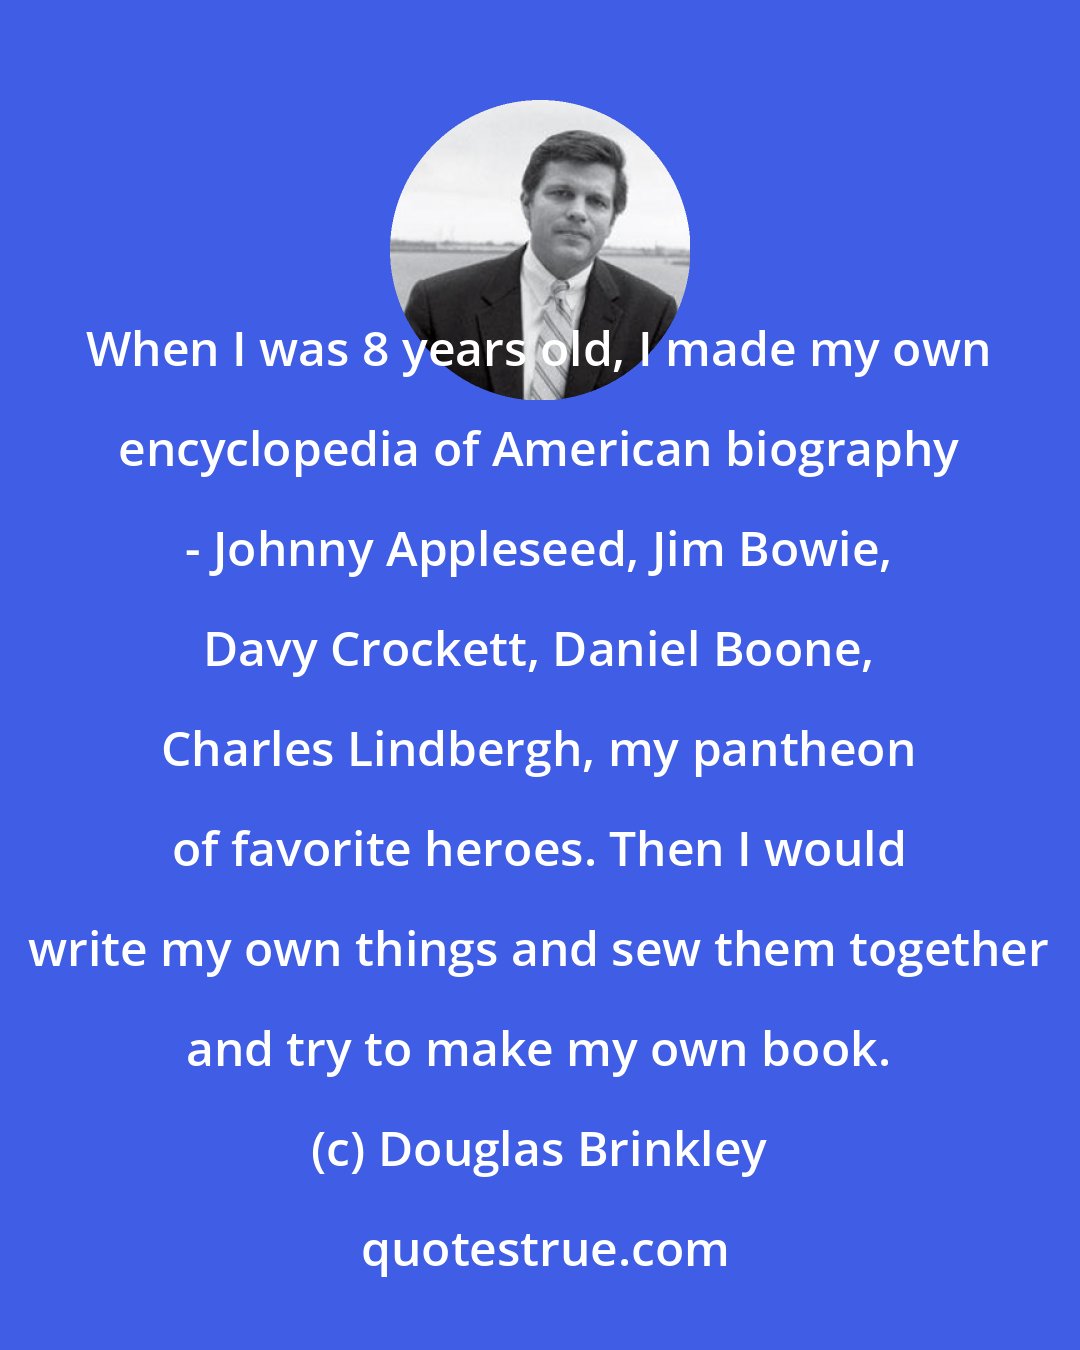 Douglas Brinkley: When I was 8 years old, I made my own encyclopedia of American biography - Johnny Appleseed, Jim Bowie, Davy Crockett, Daniel Boone, Charles Lindbergh, my pantheon of favorite heroes. Then I would write my own things and sew them together and try to make my own book.